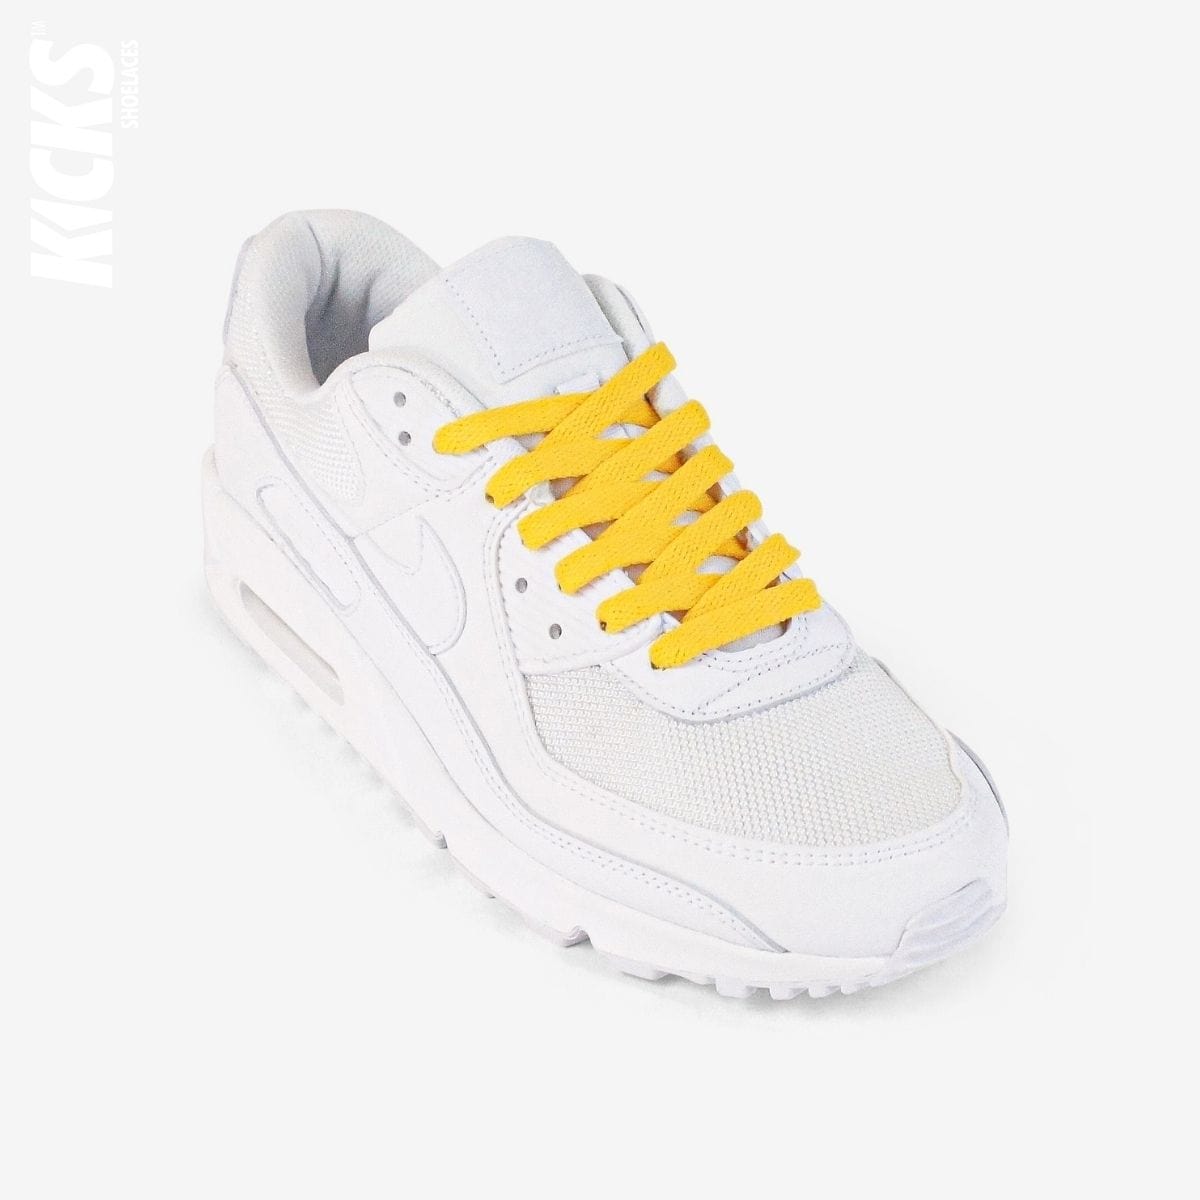 novelty-shoelaces-on-white-sneaker-using-kids-golden-yellow-flat-shoelaces